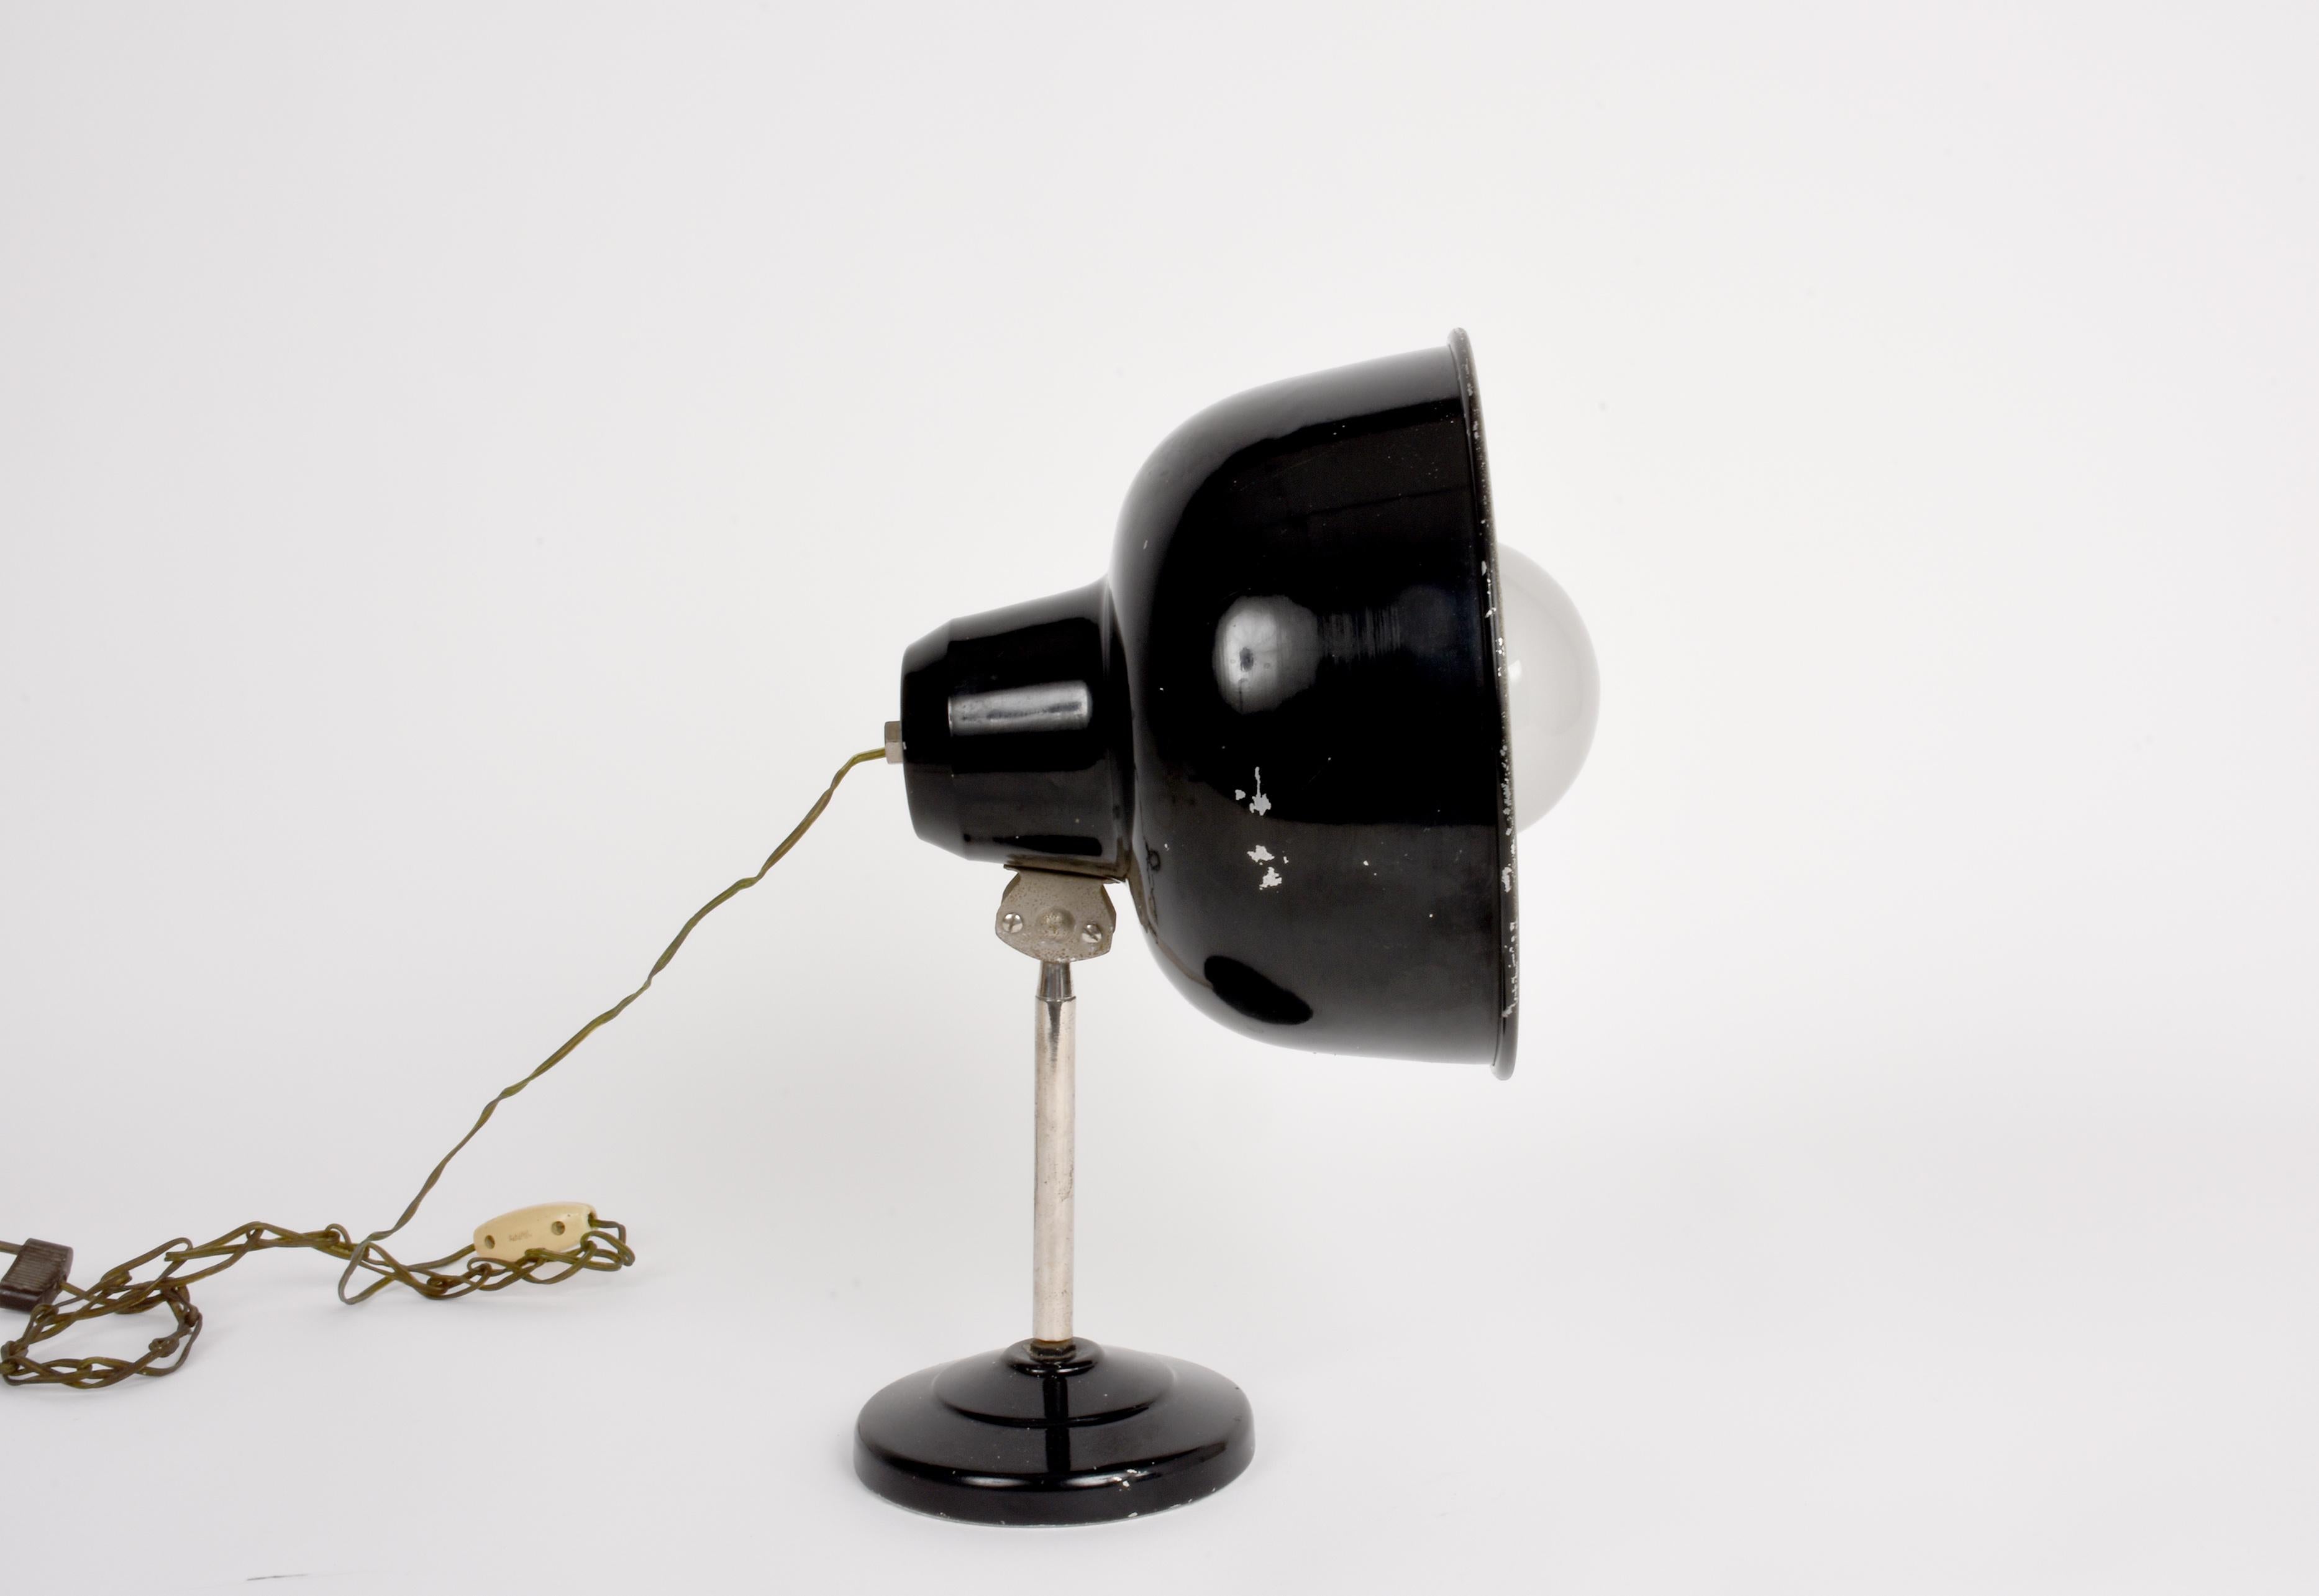 Mid-20th Century Adjustable Table Desk Lamp, Italy, circa 1940, Industrial Style, Enameled Metal